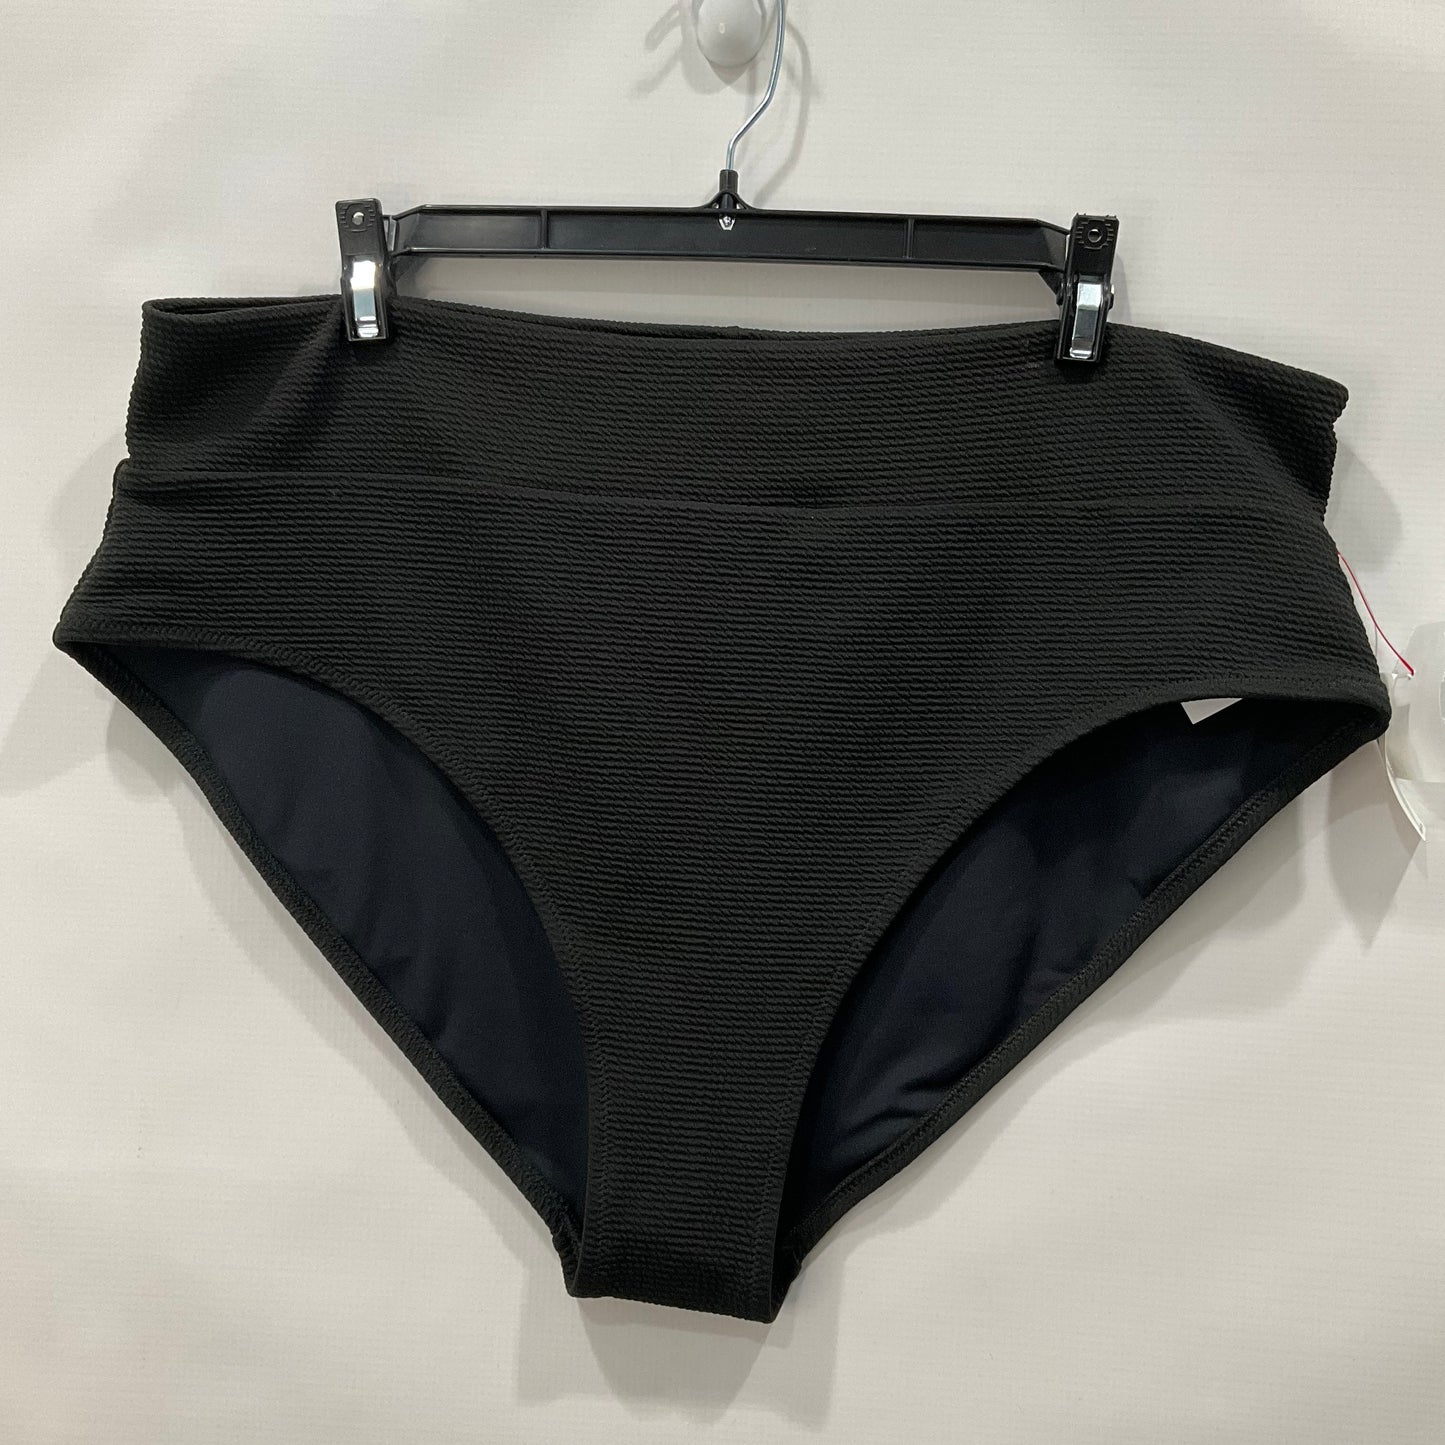 Swimsuit Bottom By Old Navy  Size: 2x